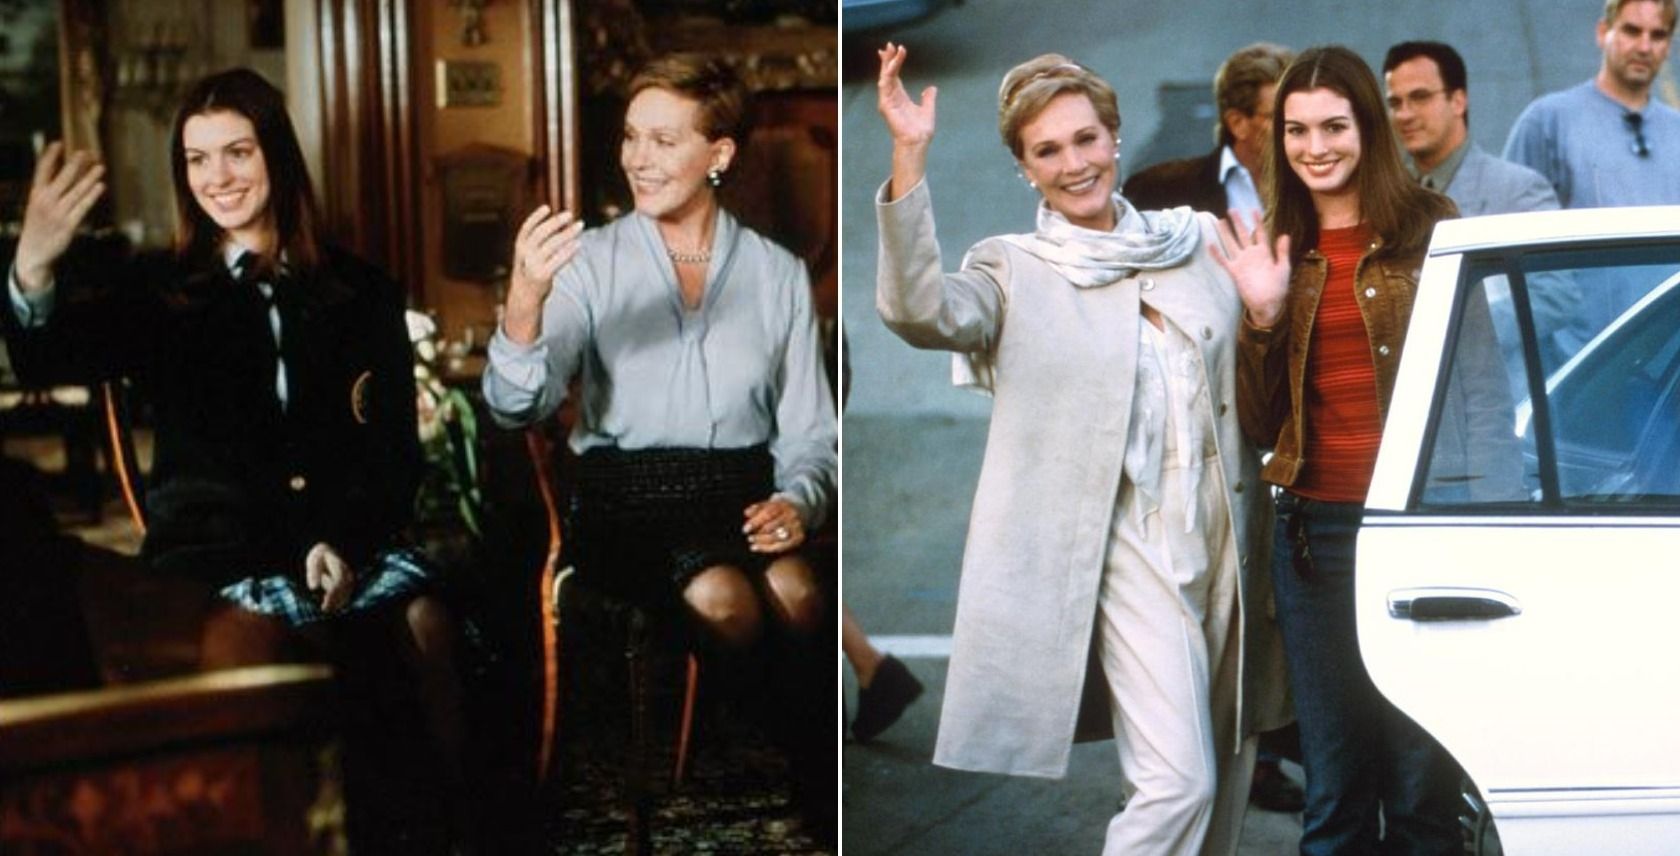 Queen Clarisse (Julie Andrews) instructing Mia (Anne Hathaway) on how to wave in the movie 